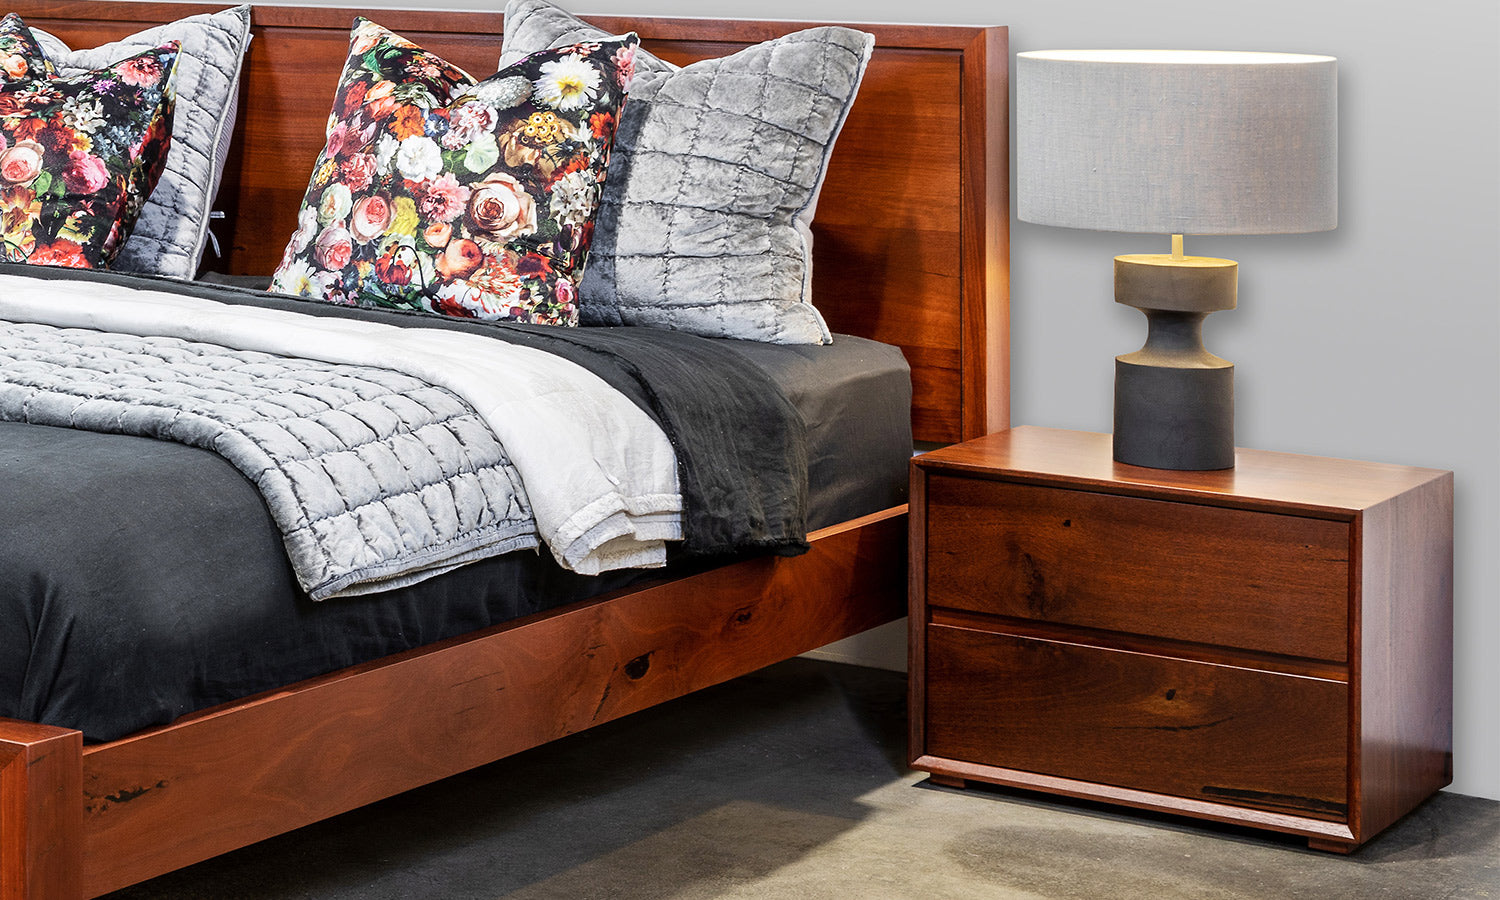 Apartment solid Marri or Jarrah Timber Wood bedside tables with two drawers or single drawer options, Perth WA